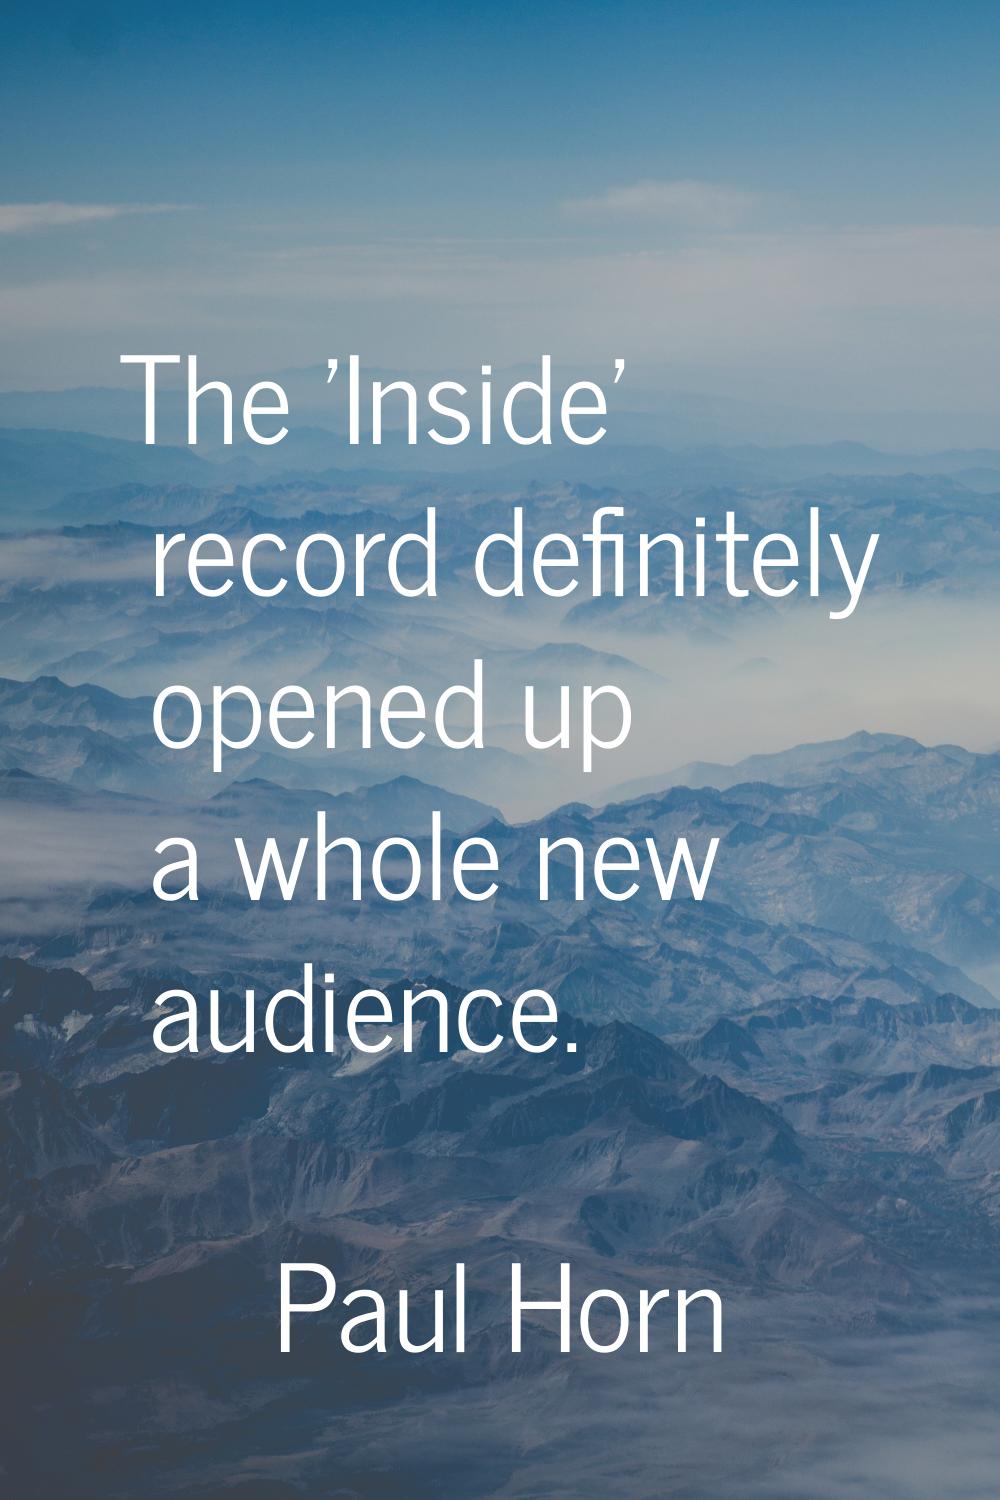 The 'Inside' record definitely opened up a whole new audience.